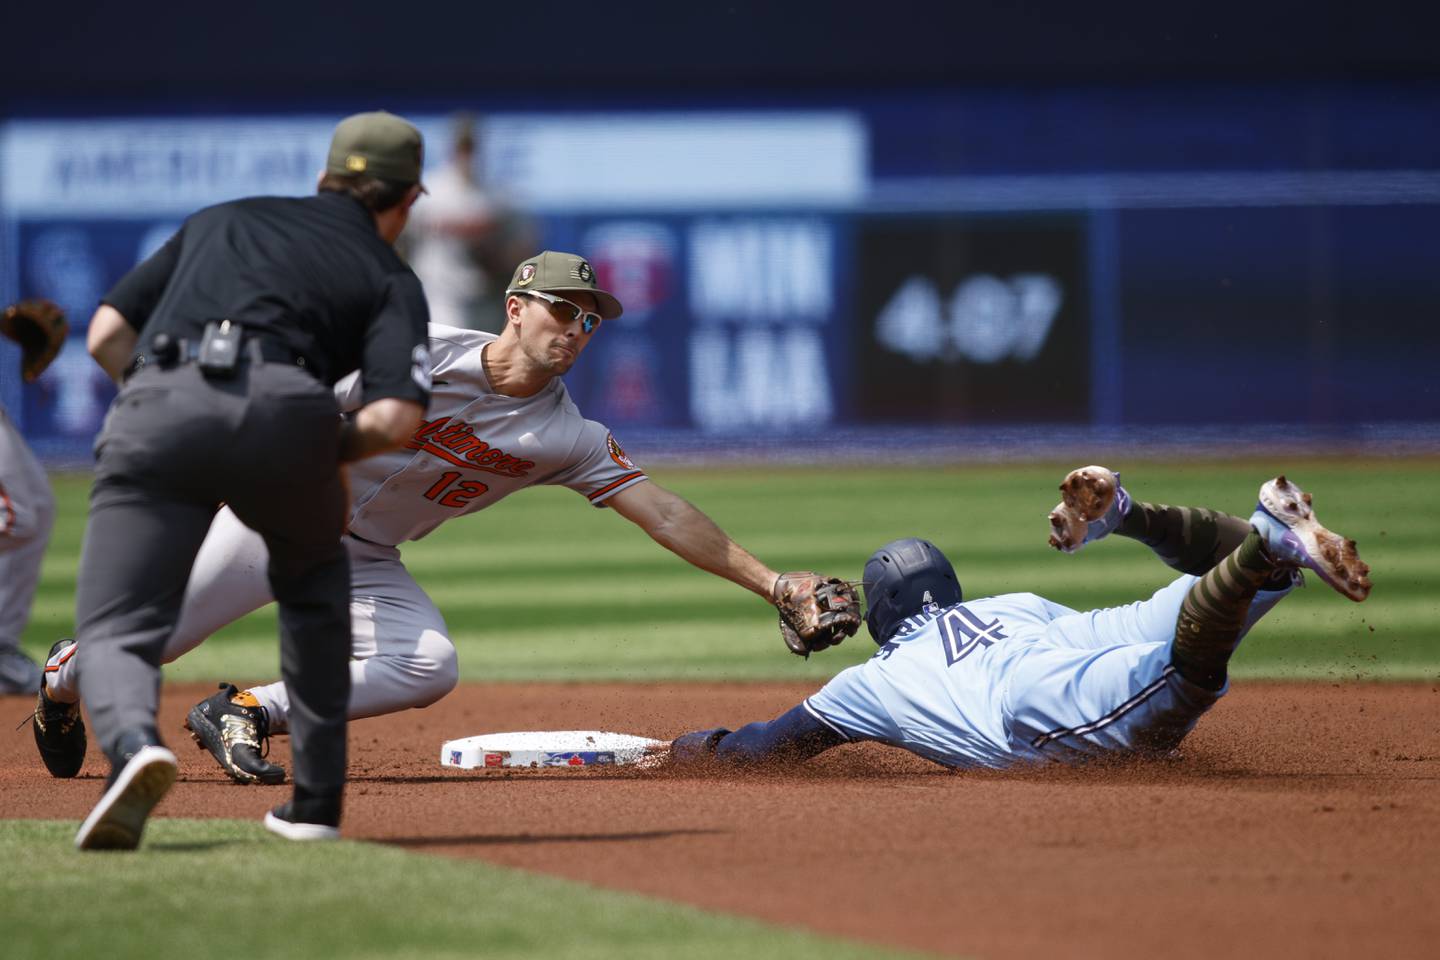 George Springer #4 of the Toronto Blue Jays steals second base from Adam Frazier #12 of the Baltimore Orioles in the first inning of their MLB game at Rogers Centre on May 21, 2023 in Toronto, Canada.